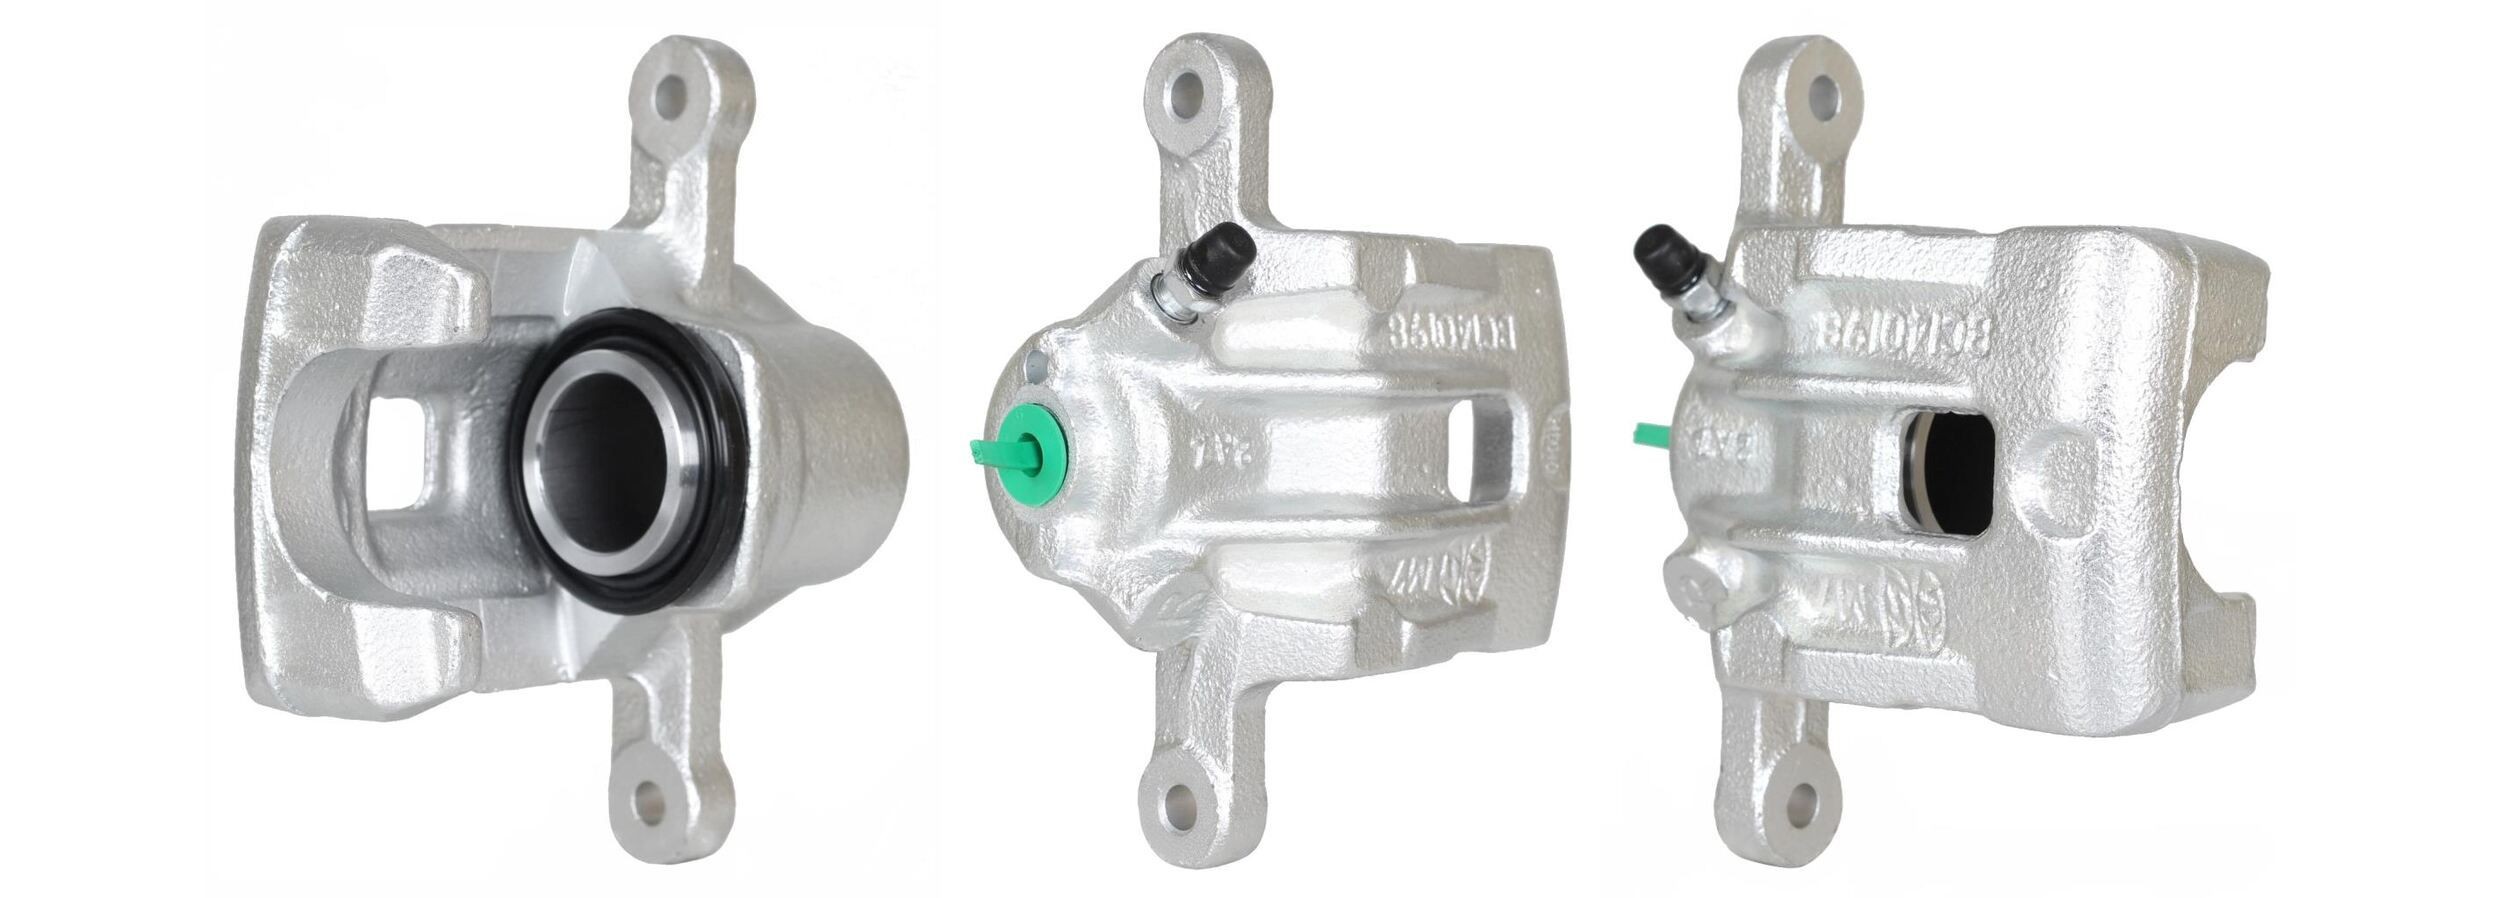 ELSTOCK 91-1763 Turbo Exhaust Turbocharger, Pneumatically controlled actuator, with gaskets/seals